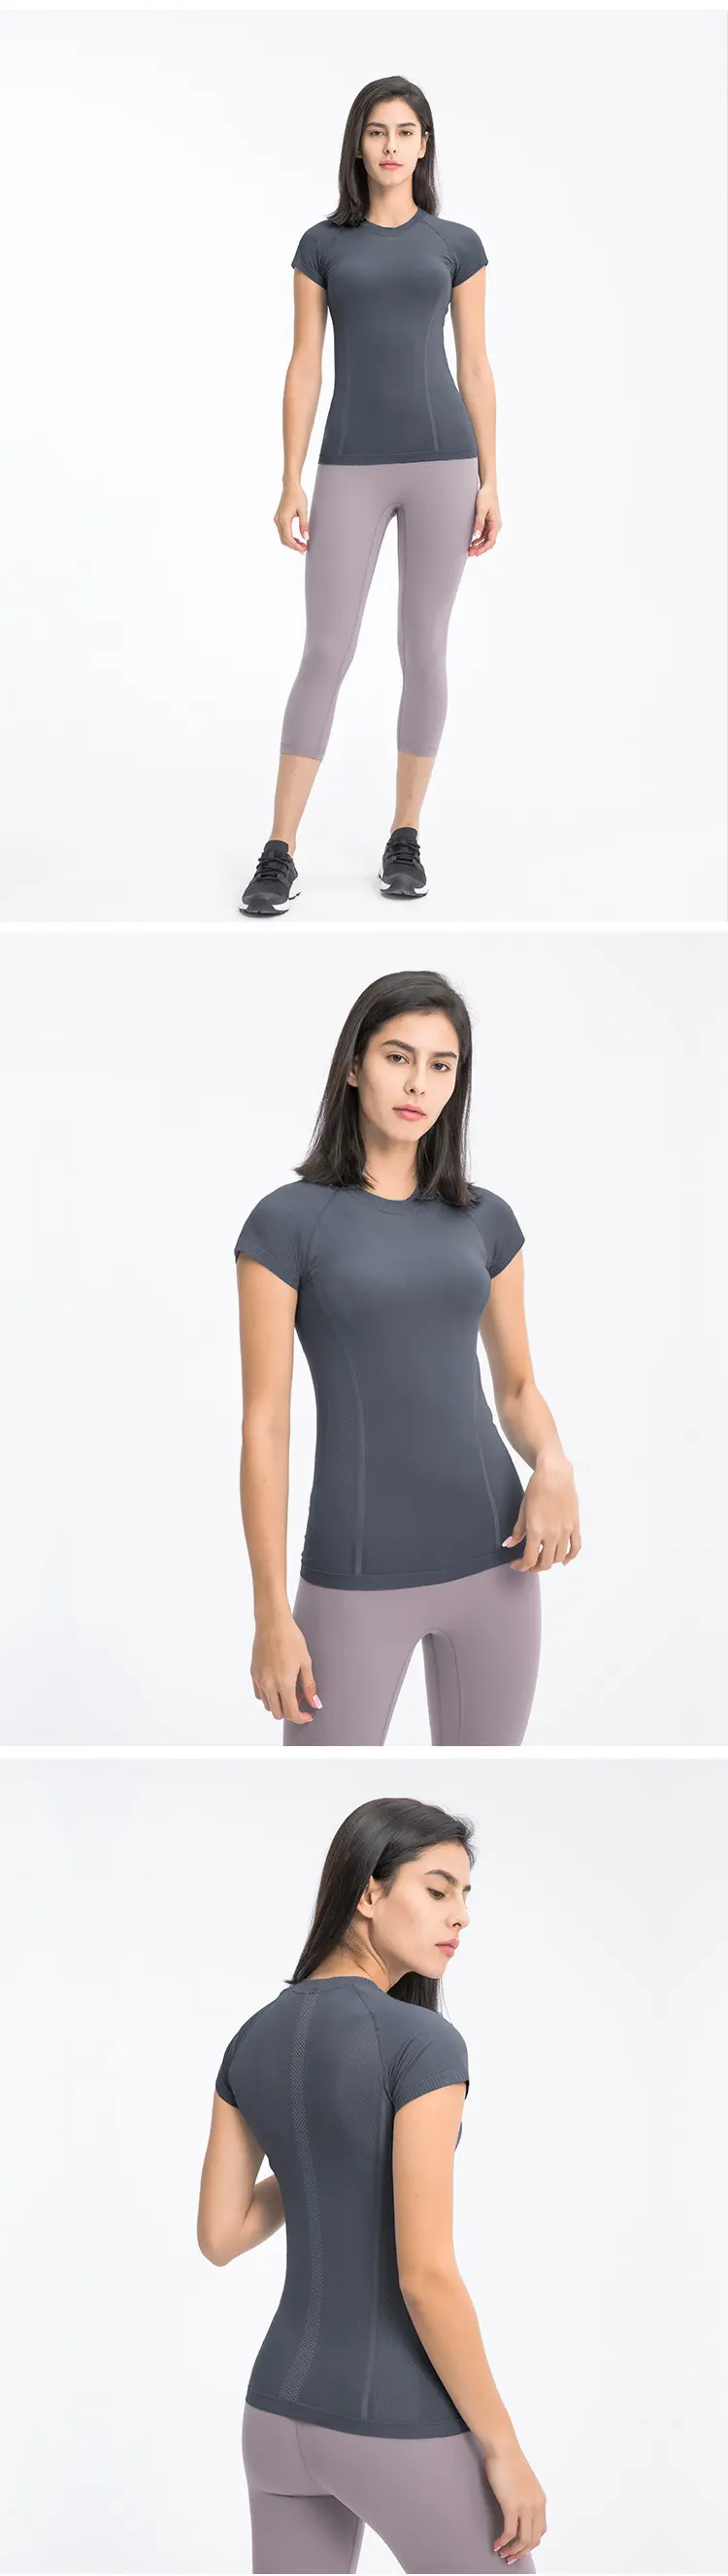 Lululemon Supplier Quick Dry Exercise And Fitness Short Sleeve Femme Top Women Yoga Wear Blouse Casual Plain T-Shirt